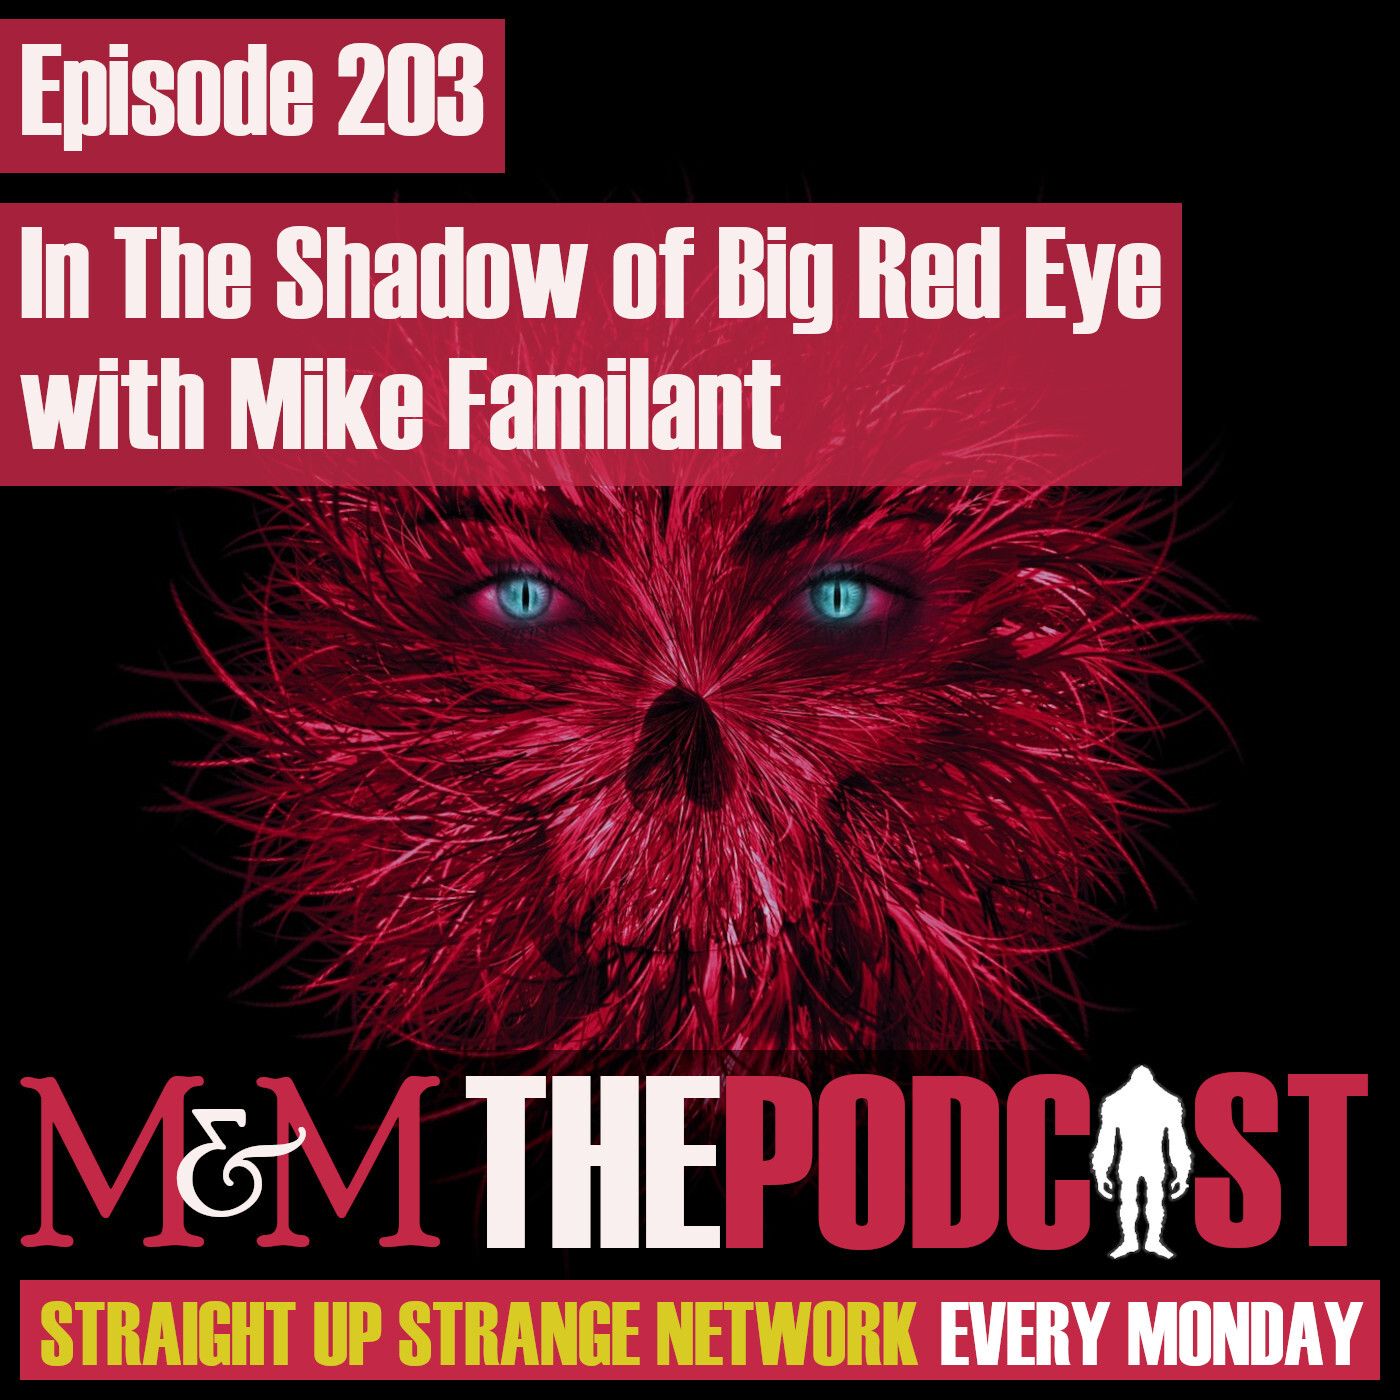 Mysteries and Monsters: Episode 203 In The Shadow Of Big Red Eye with Mike Familant